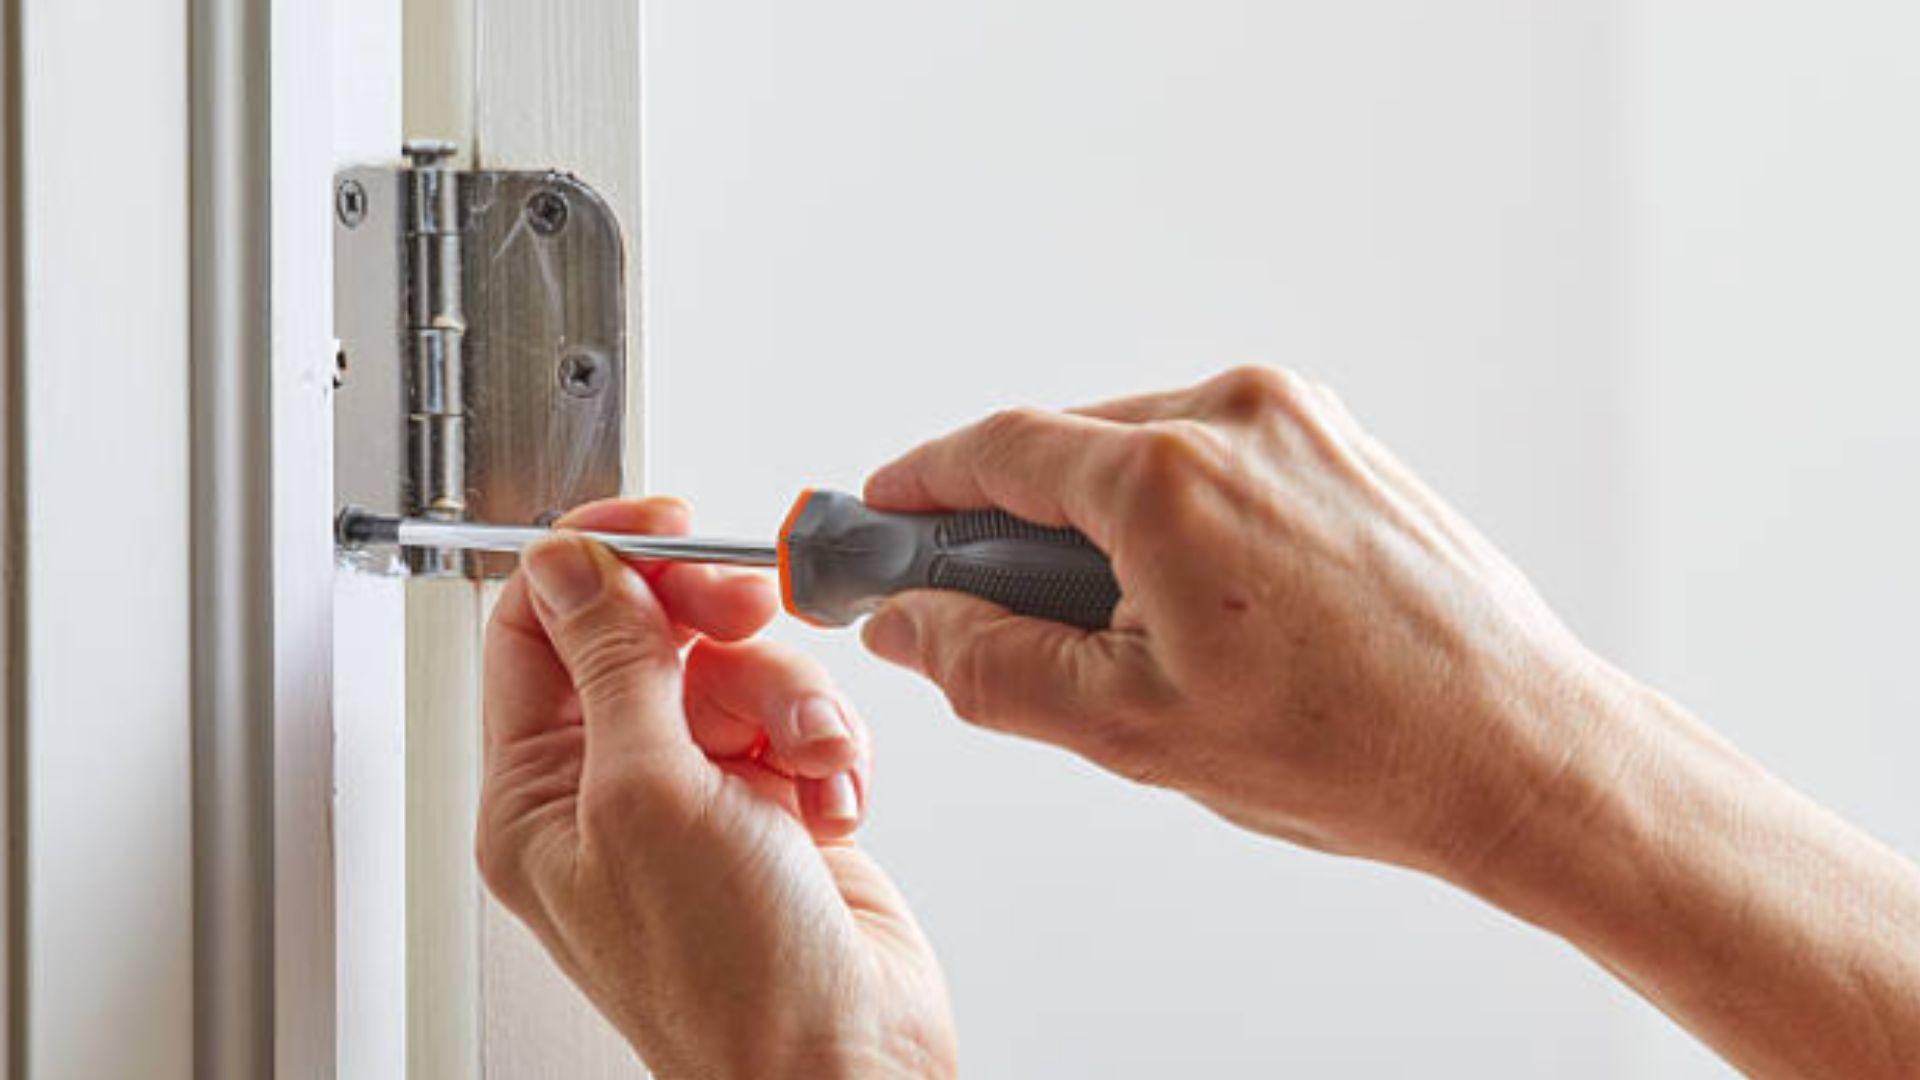 How to install hinges on a door [2023]